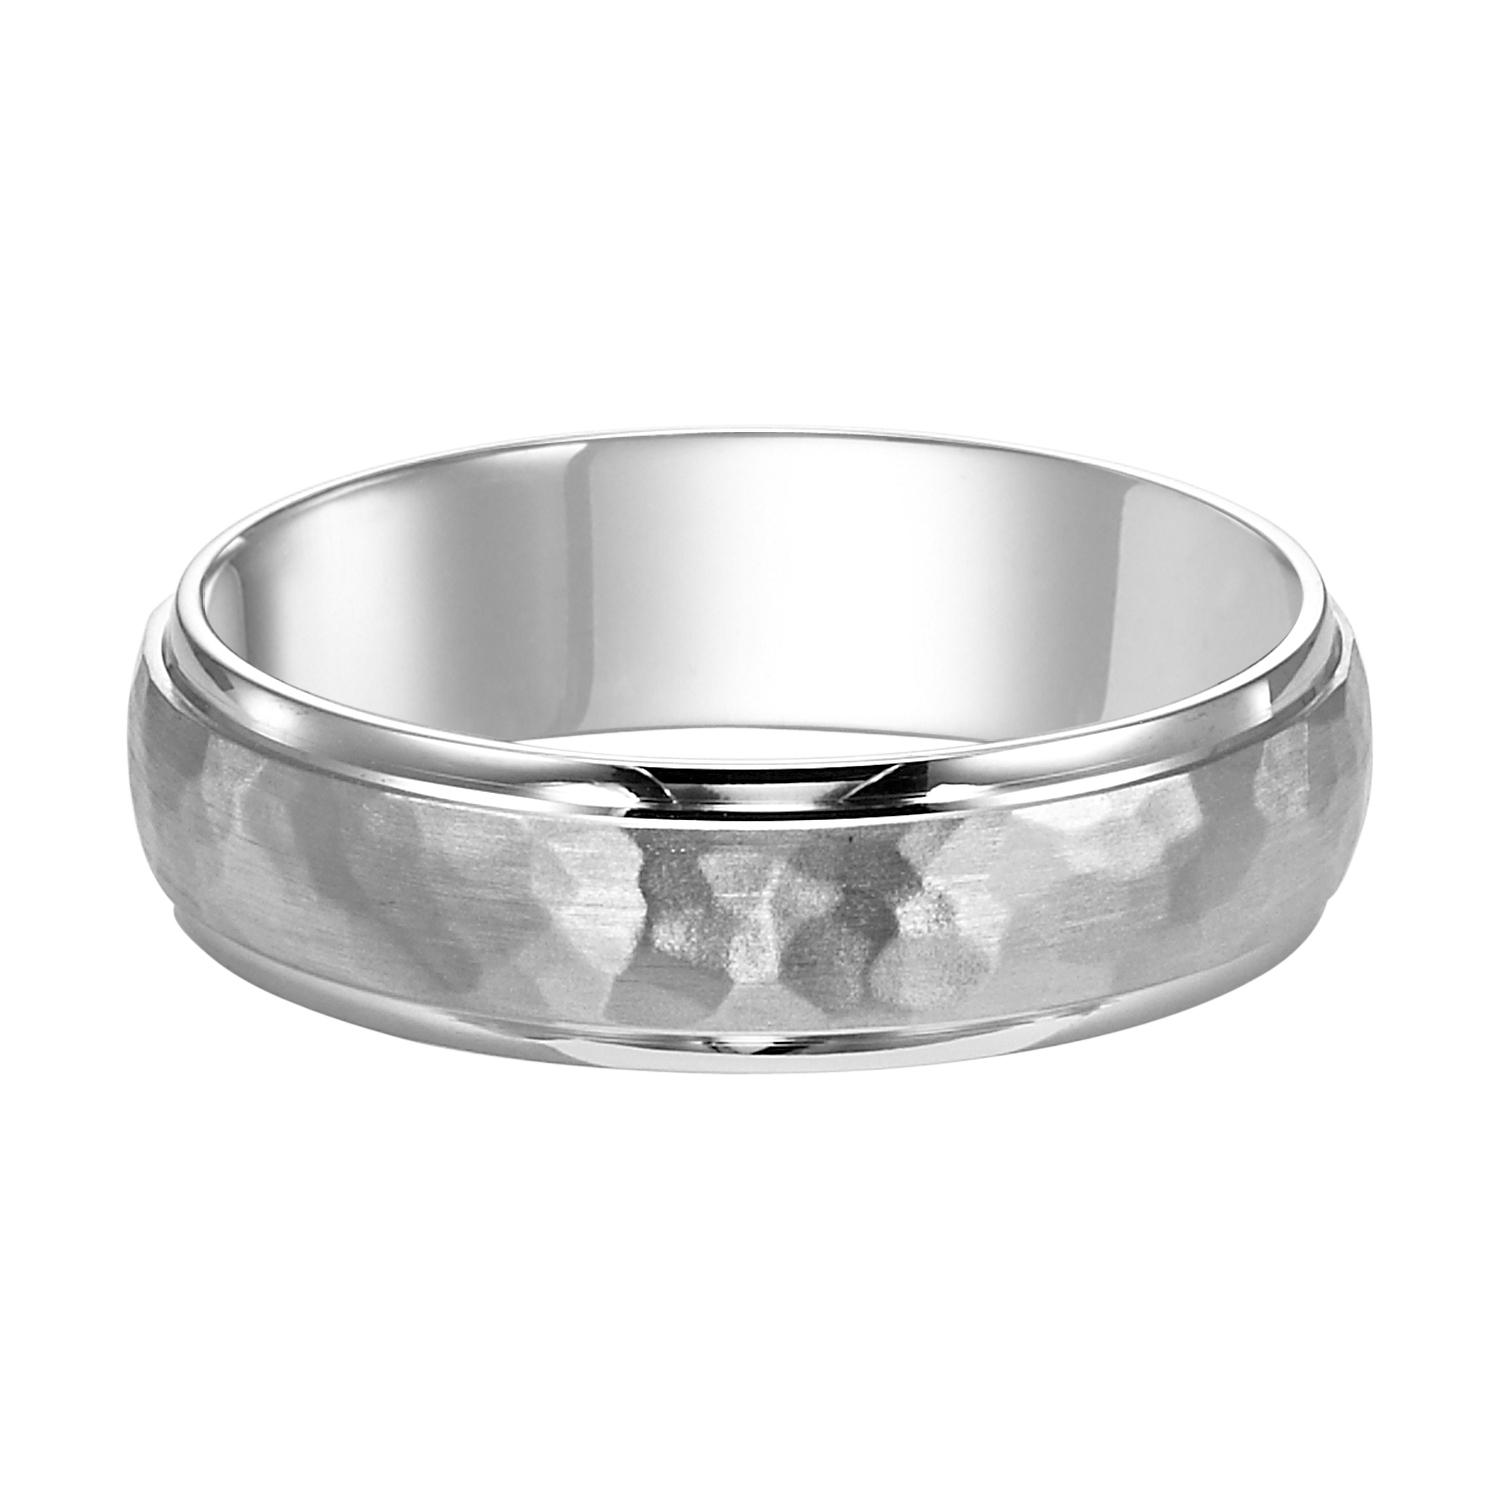 Gents 14K White Gold 6mm Wedding Band with Hammered Finish 0